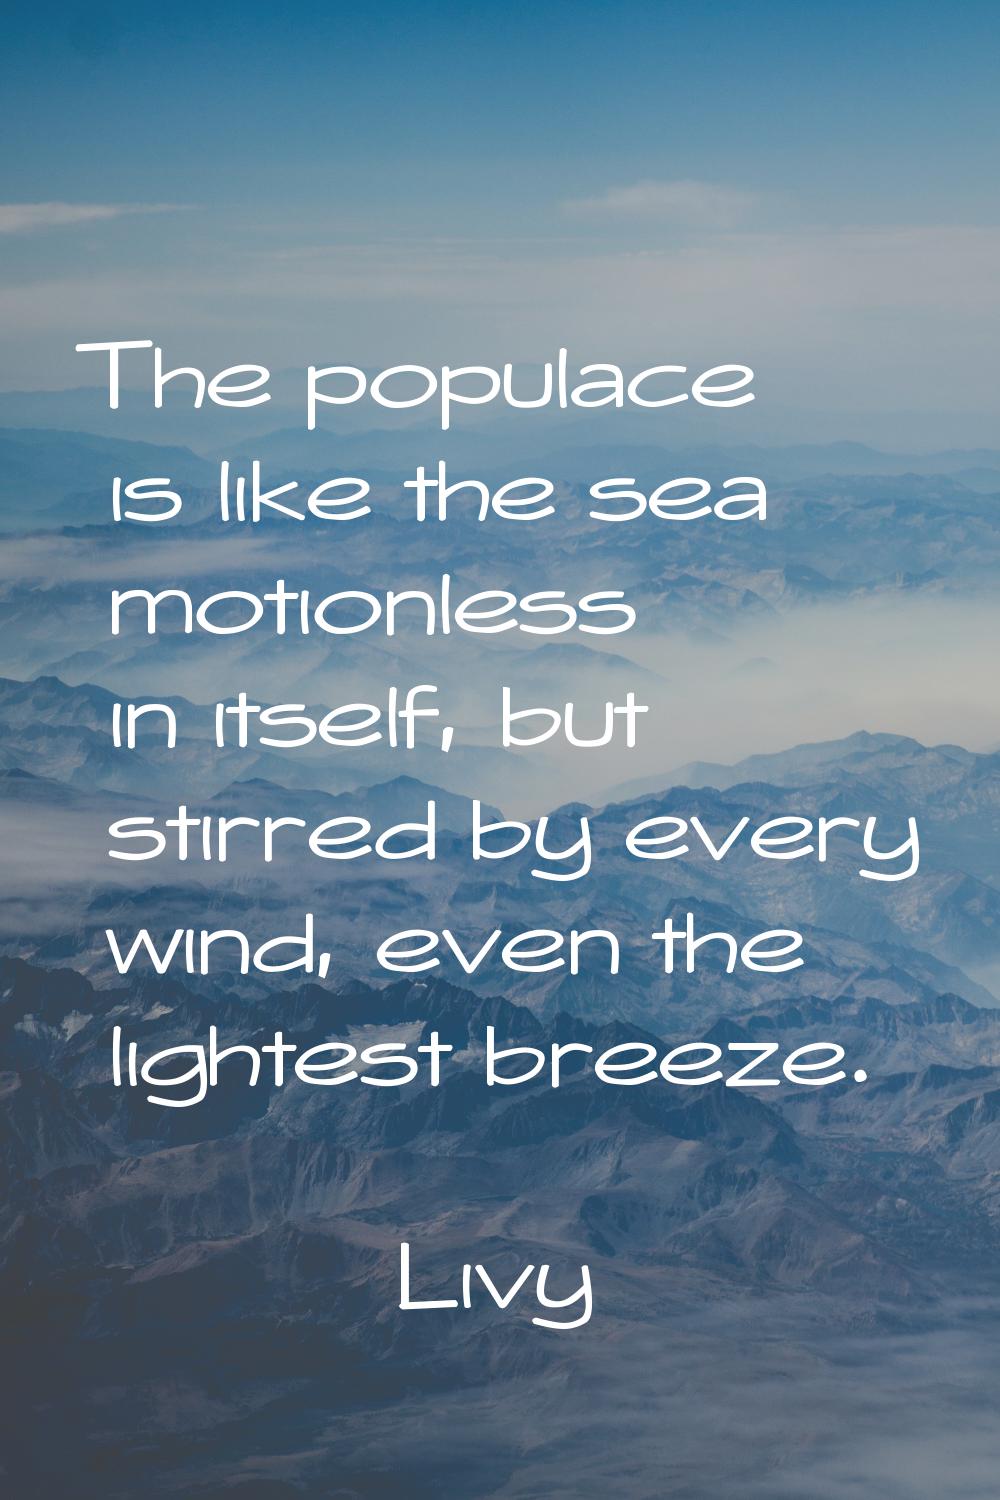 The populace is like the sea motionless in itself, but stirred by every wind, even the lightest bre